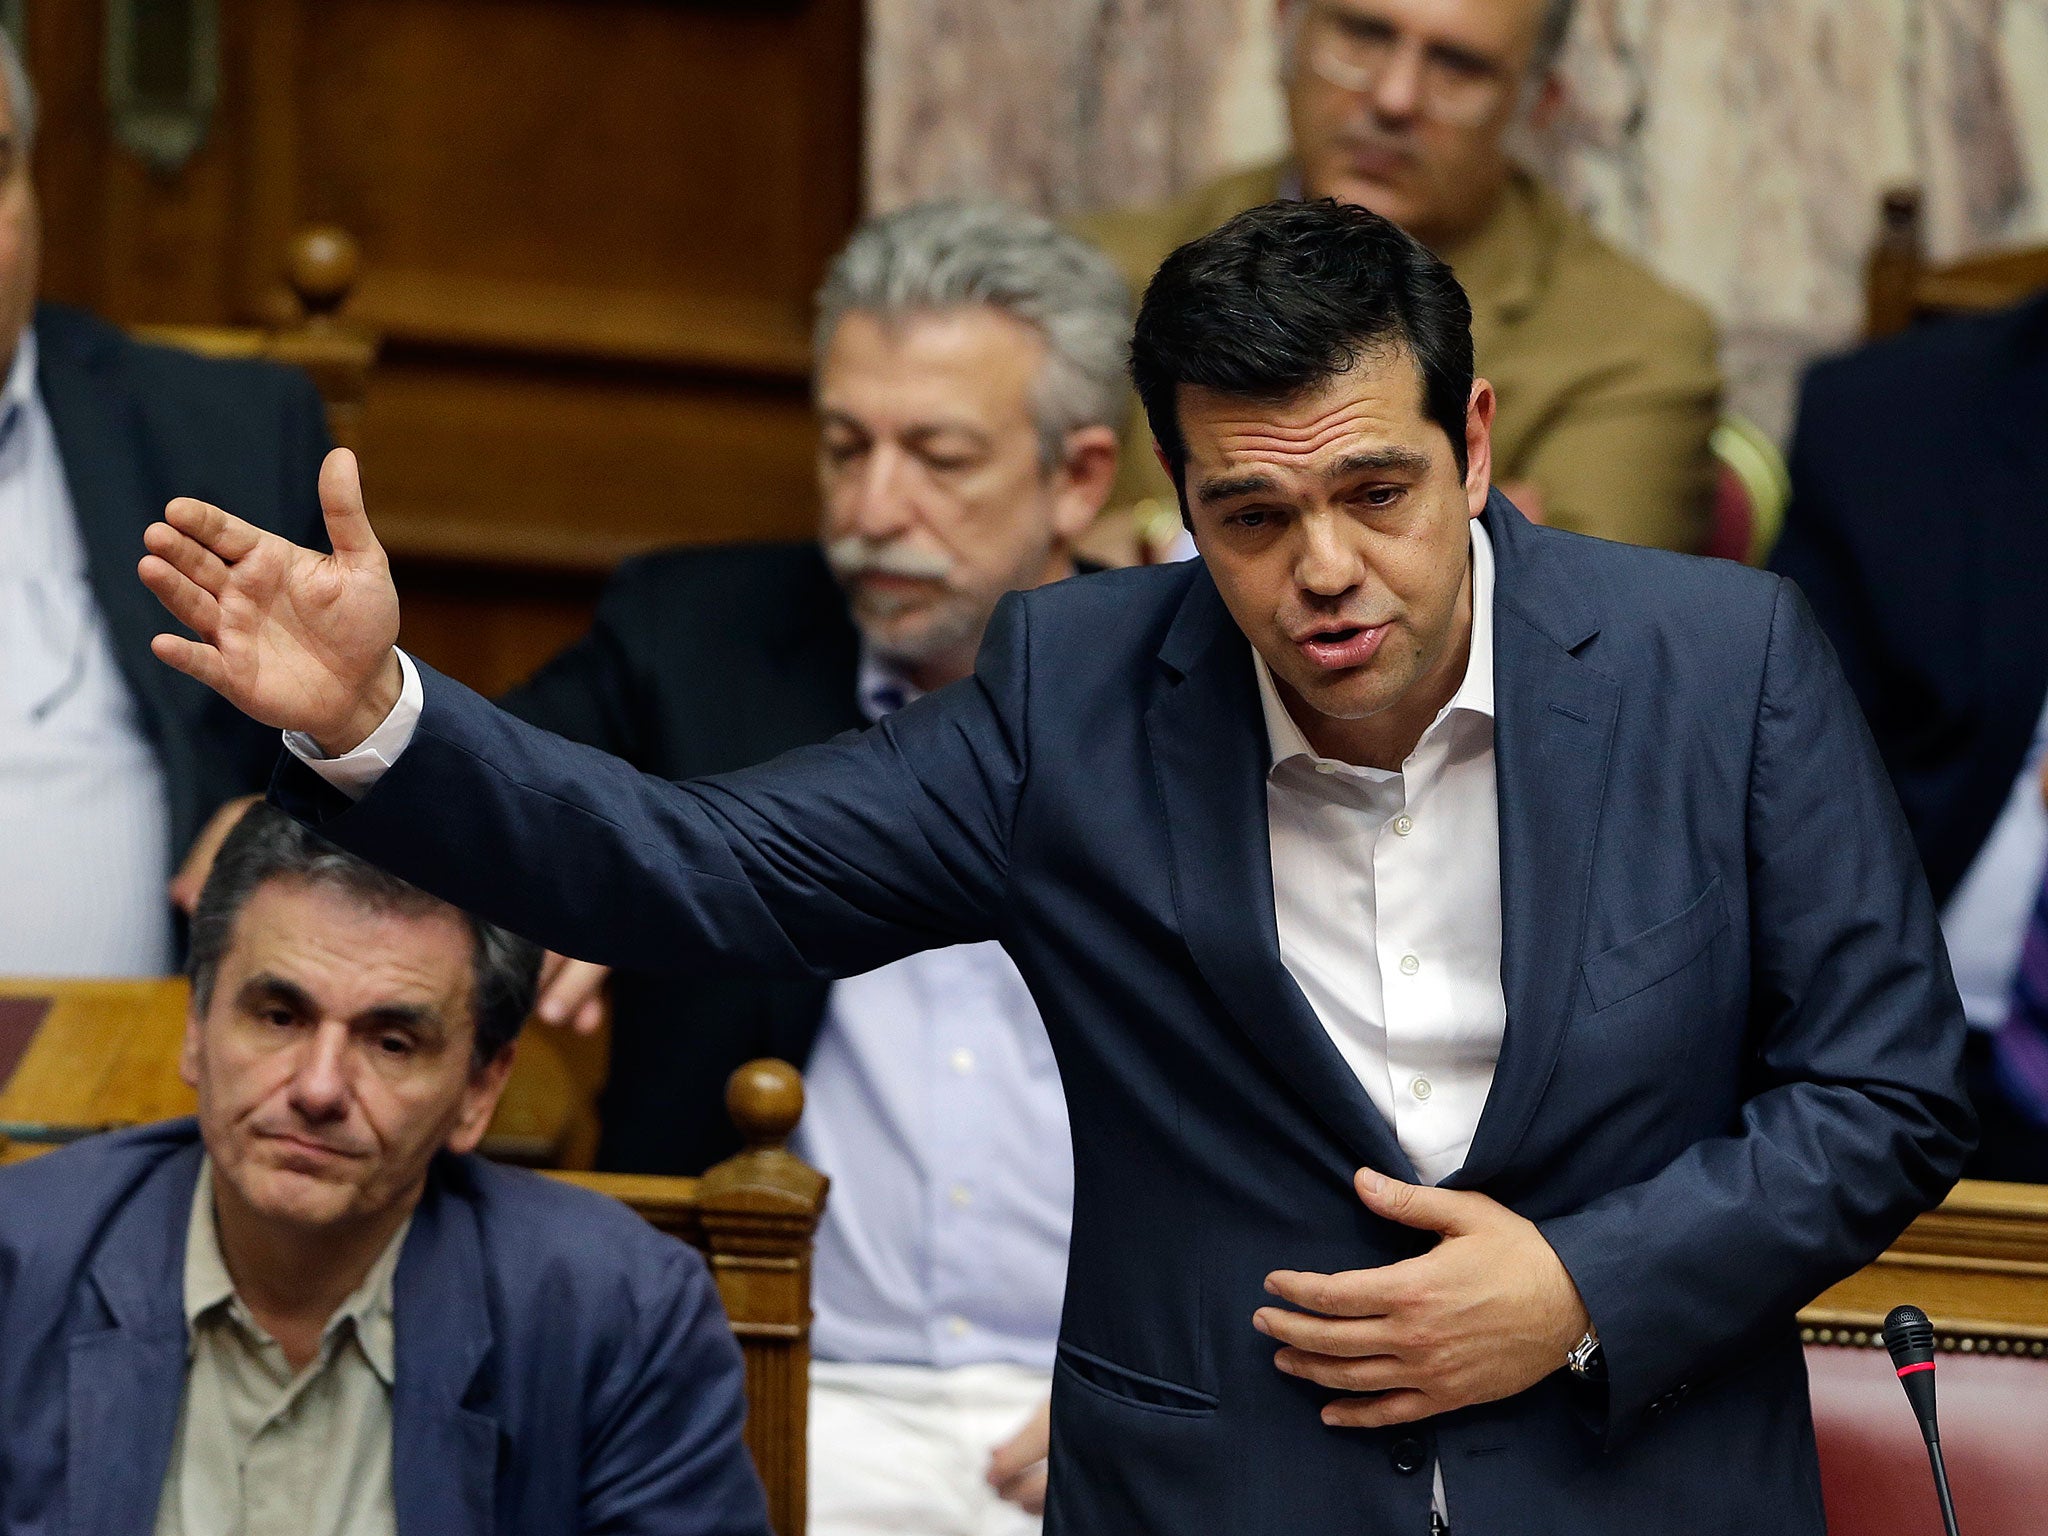 Prime Minister, Alexis Tsipras, delivers a speech during the meeting in the Greek parliament